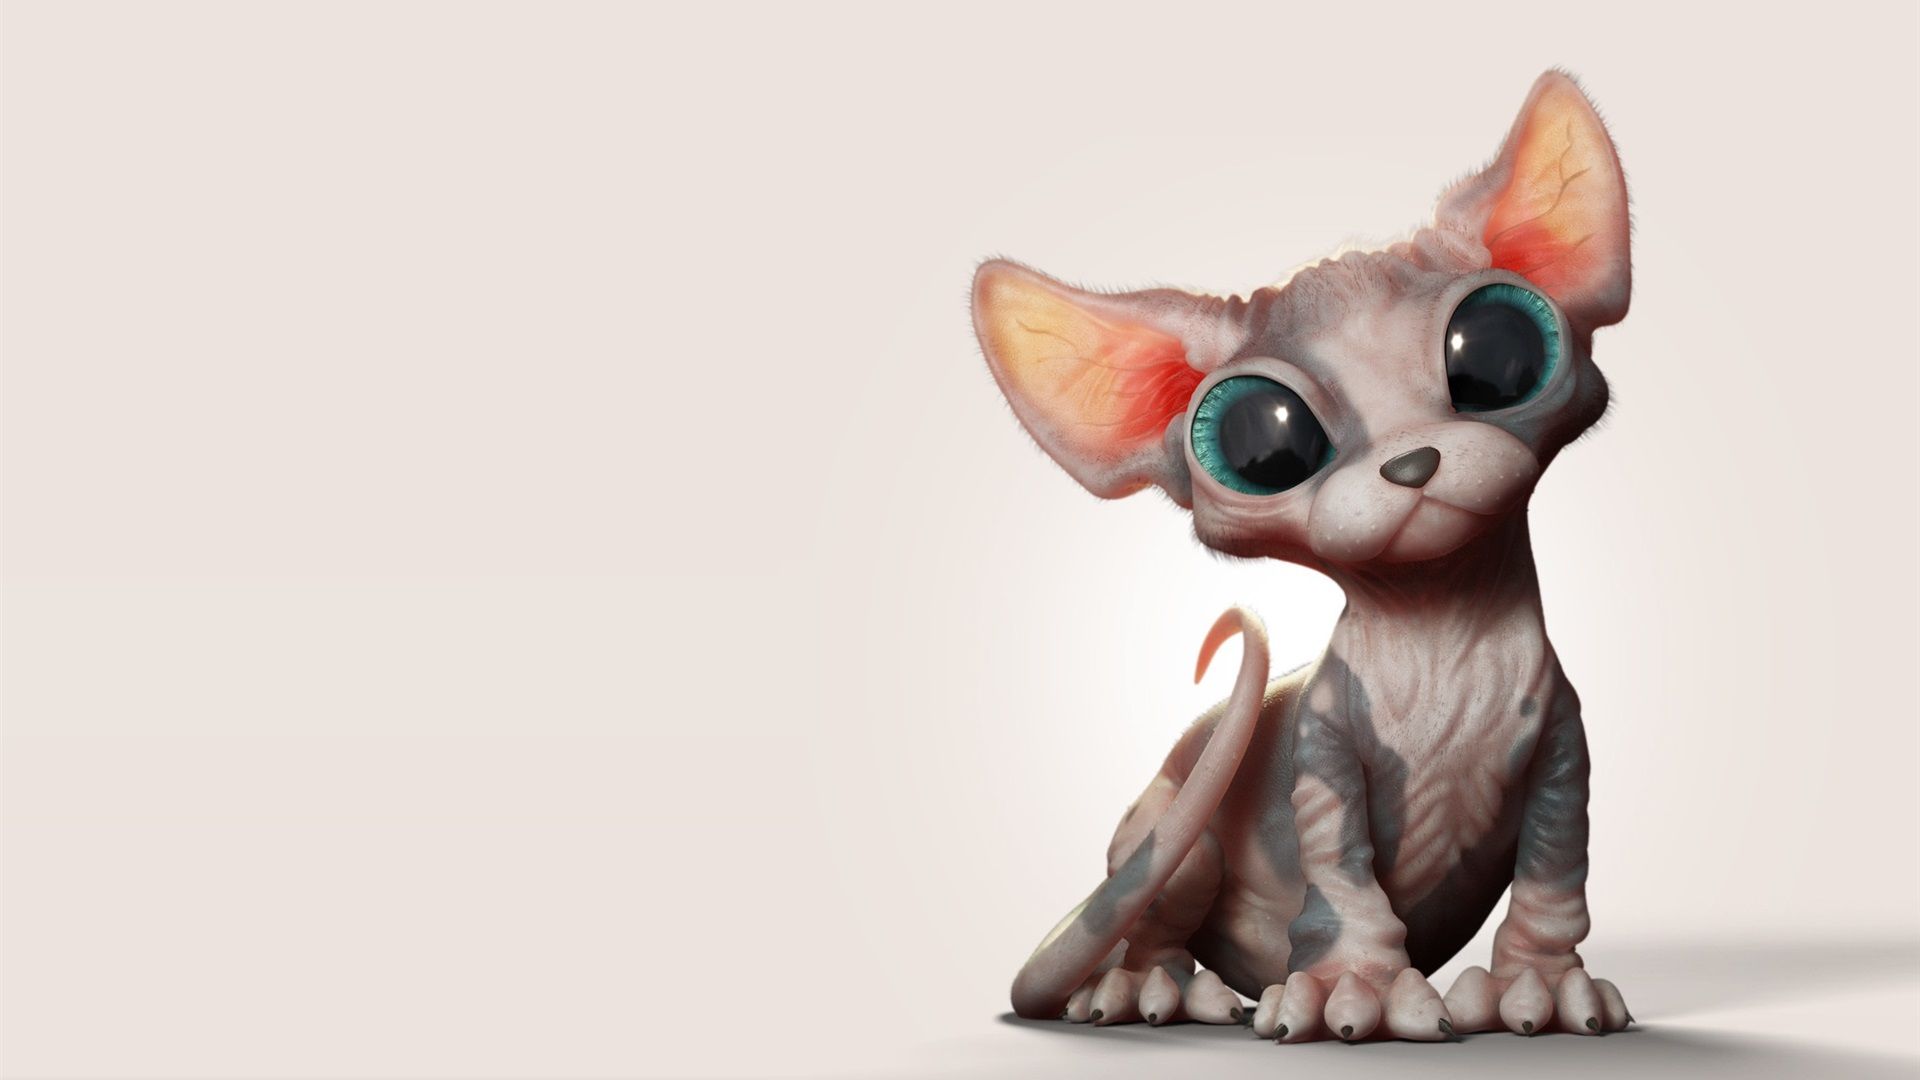 Wallpaper Sphynx cat, art picture 1920x1200 HD Picture, Image